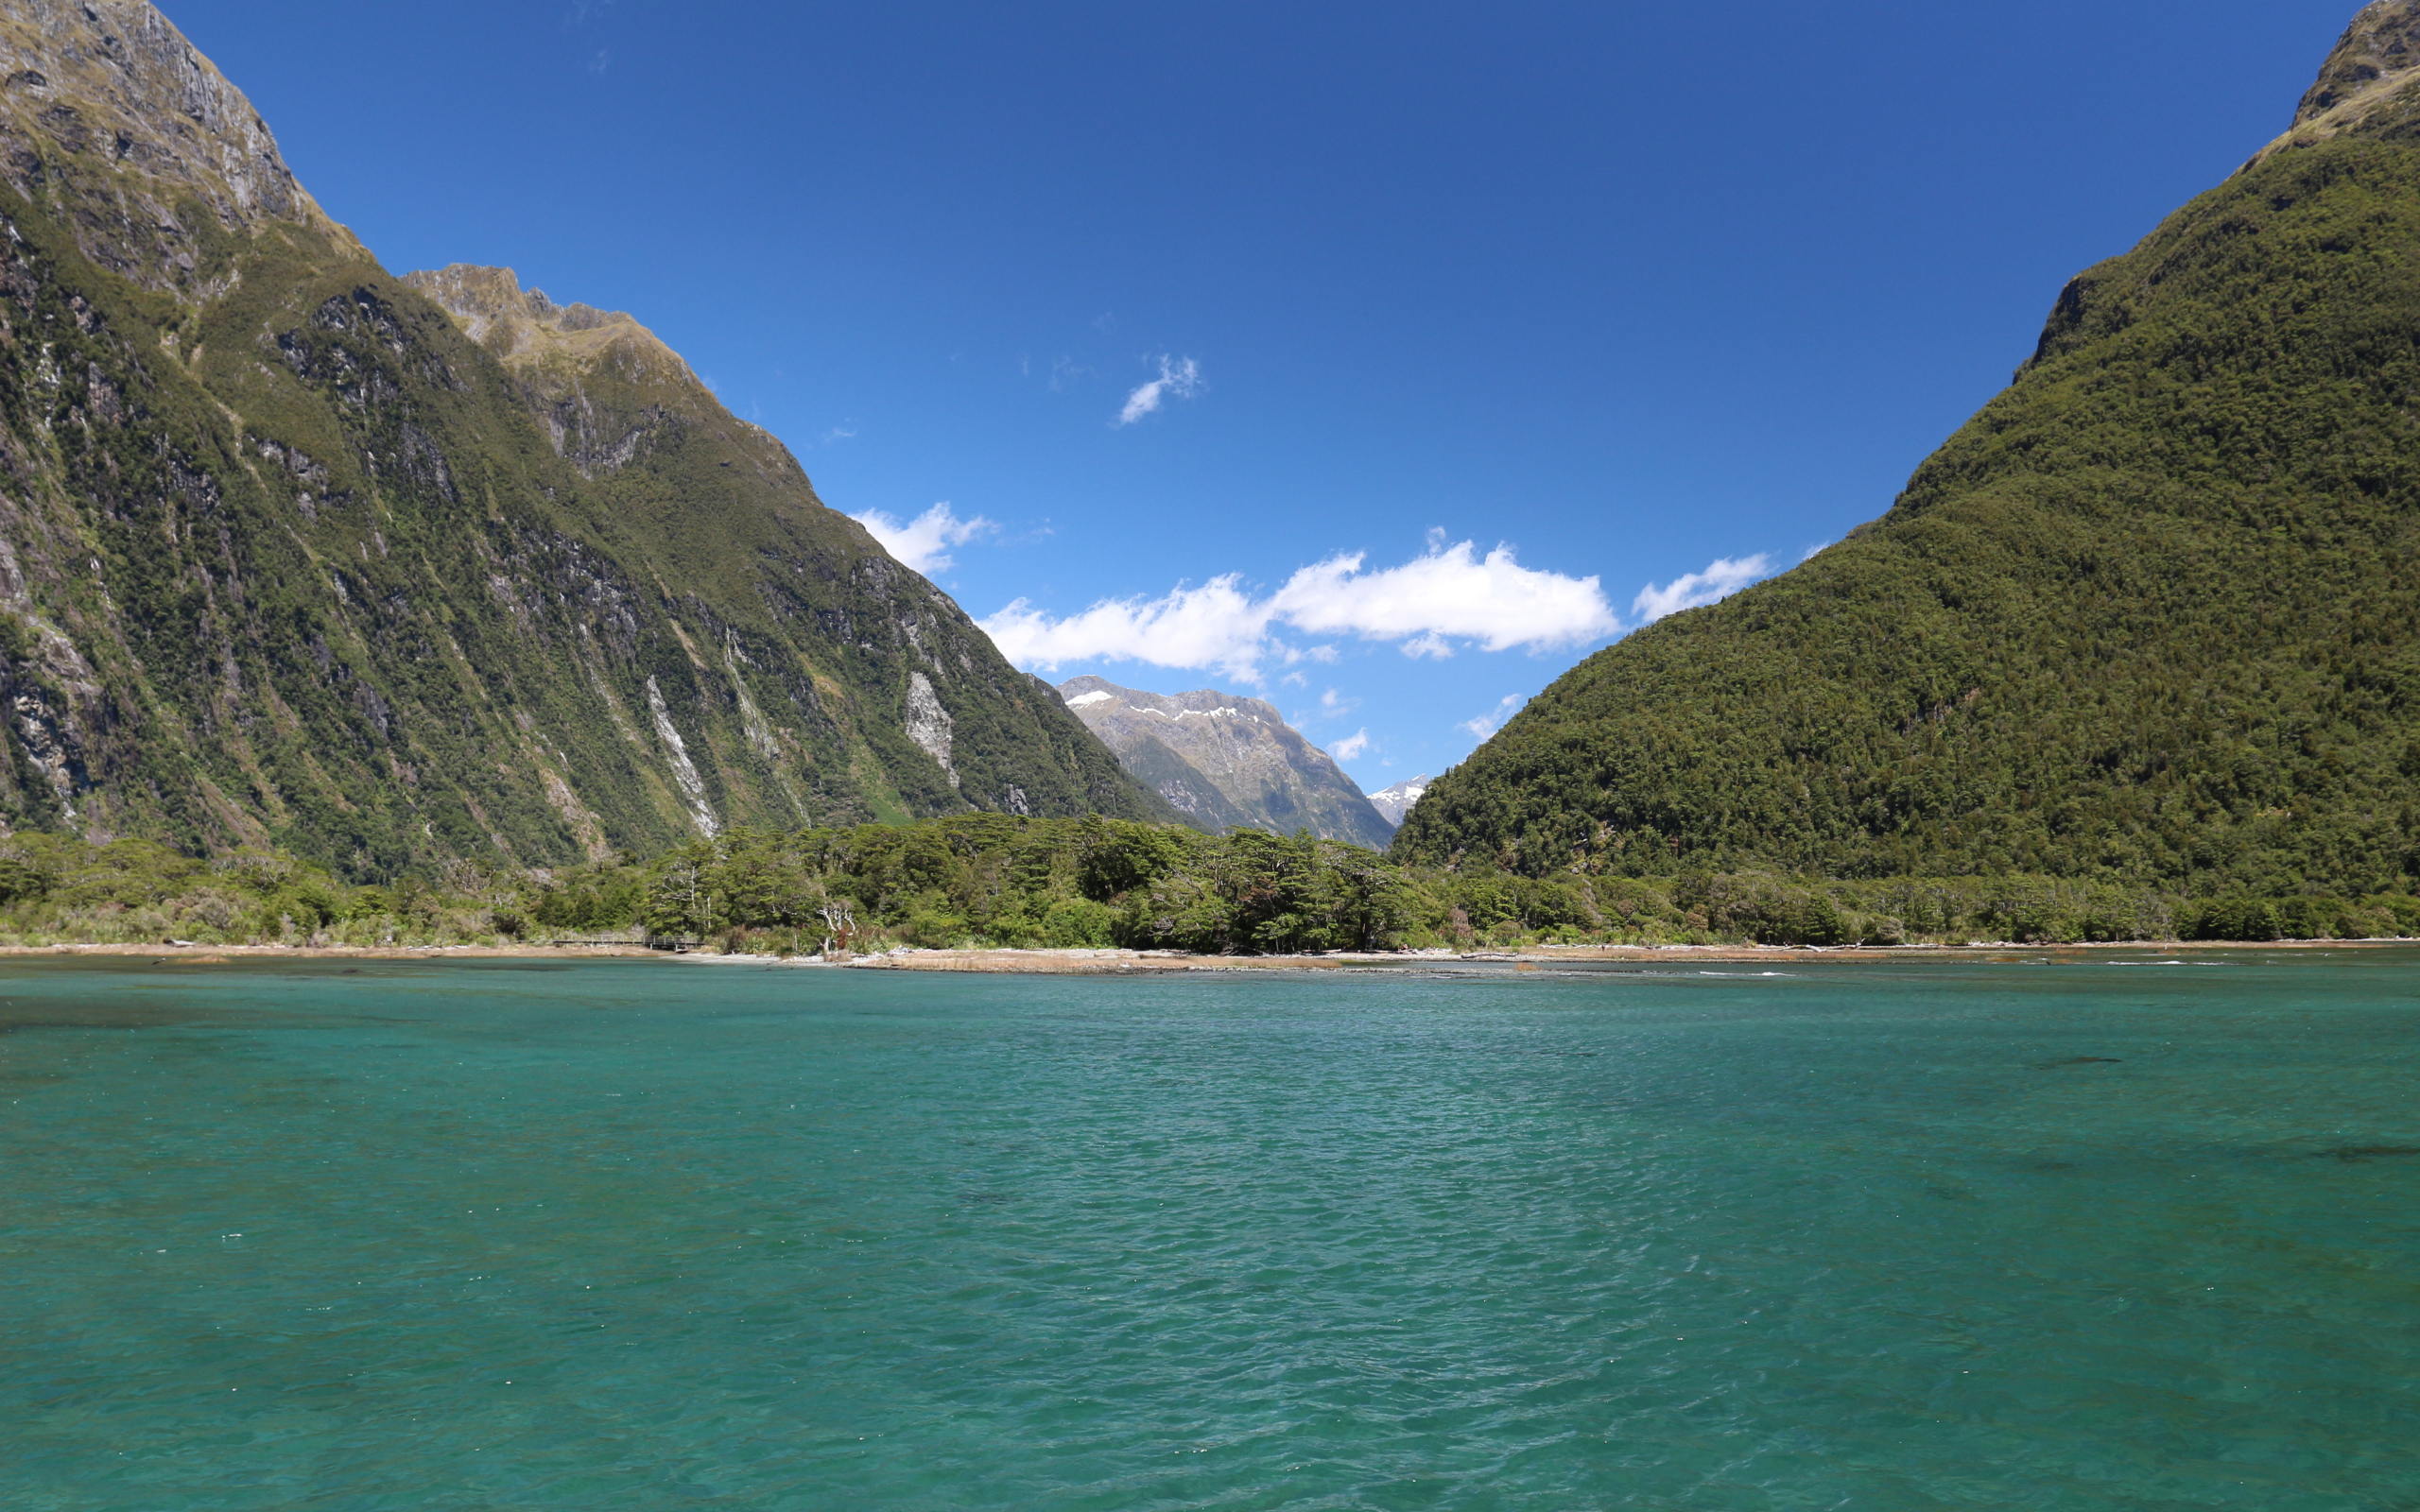 Blue water in the lake on the background of green-covered mountains under a blue sky